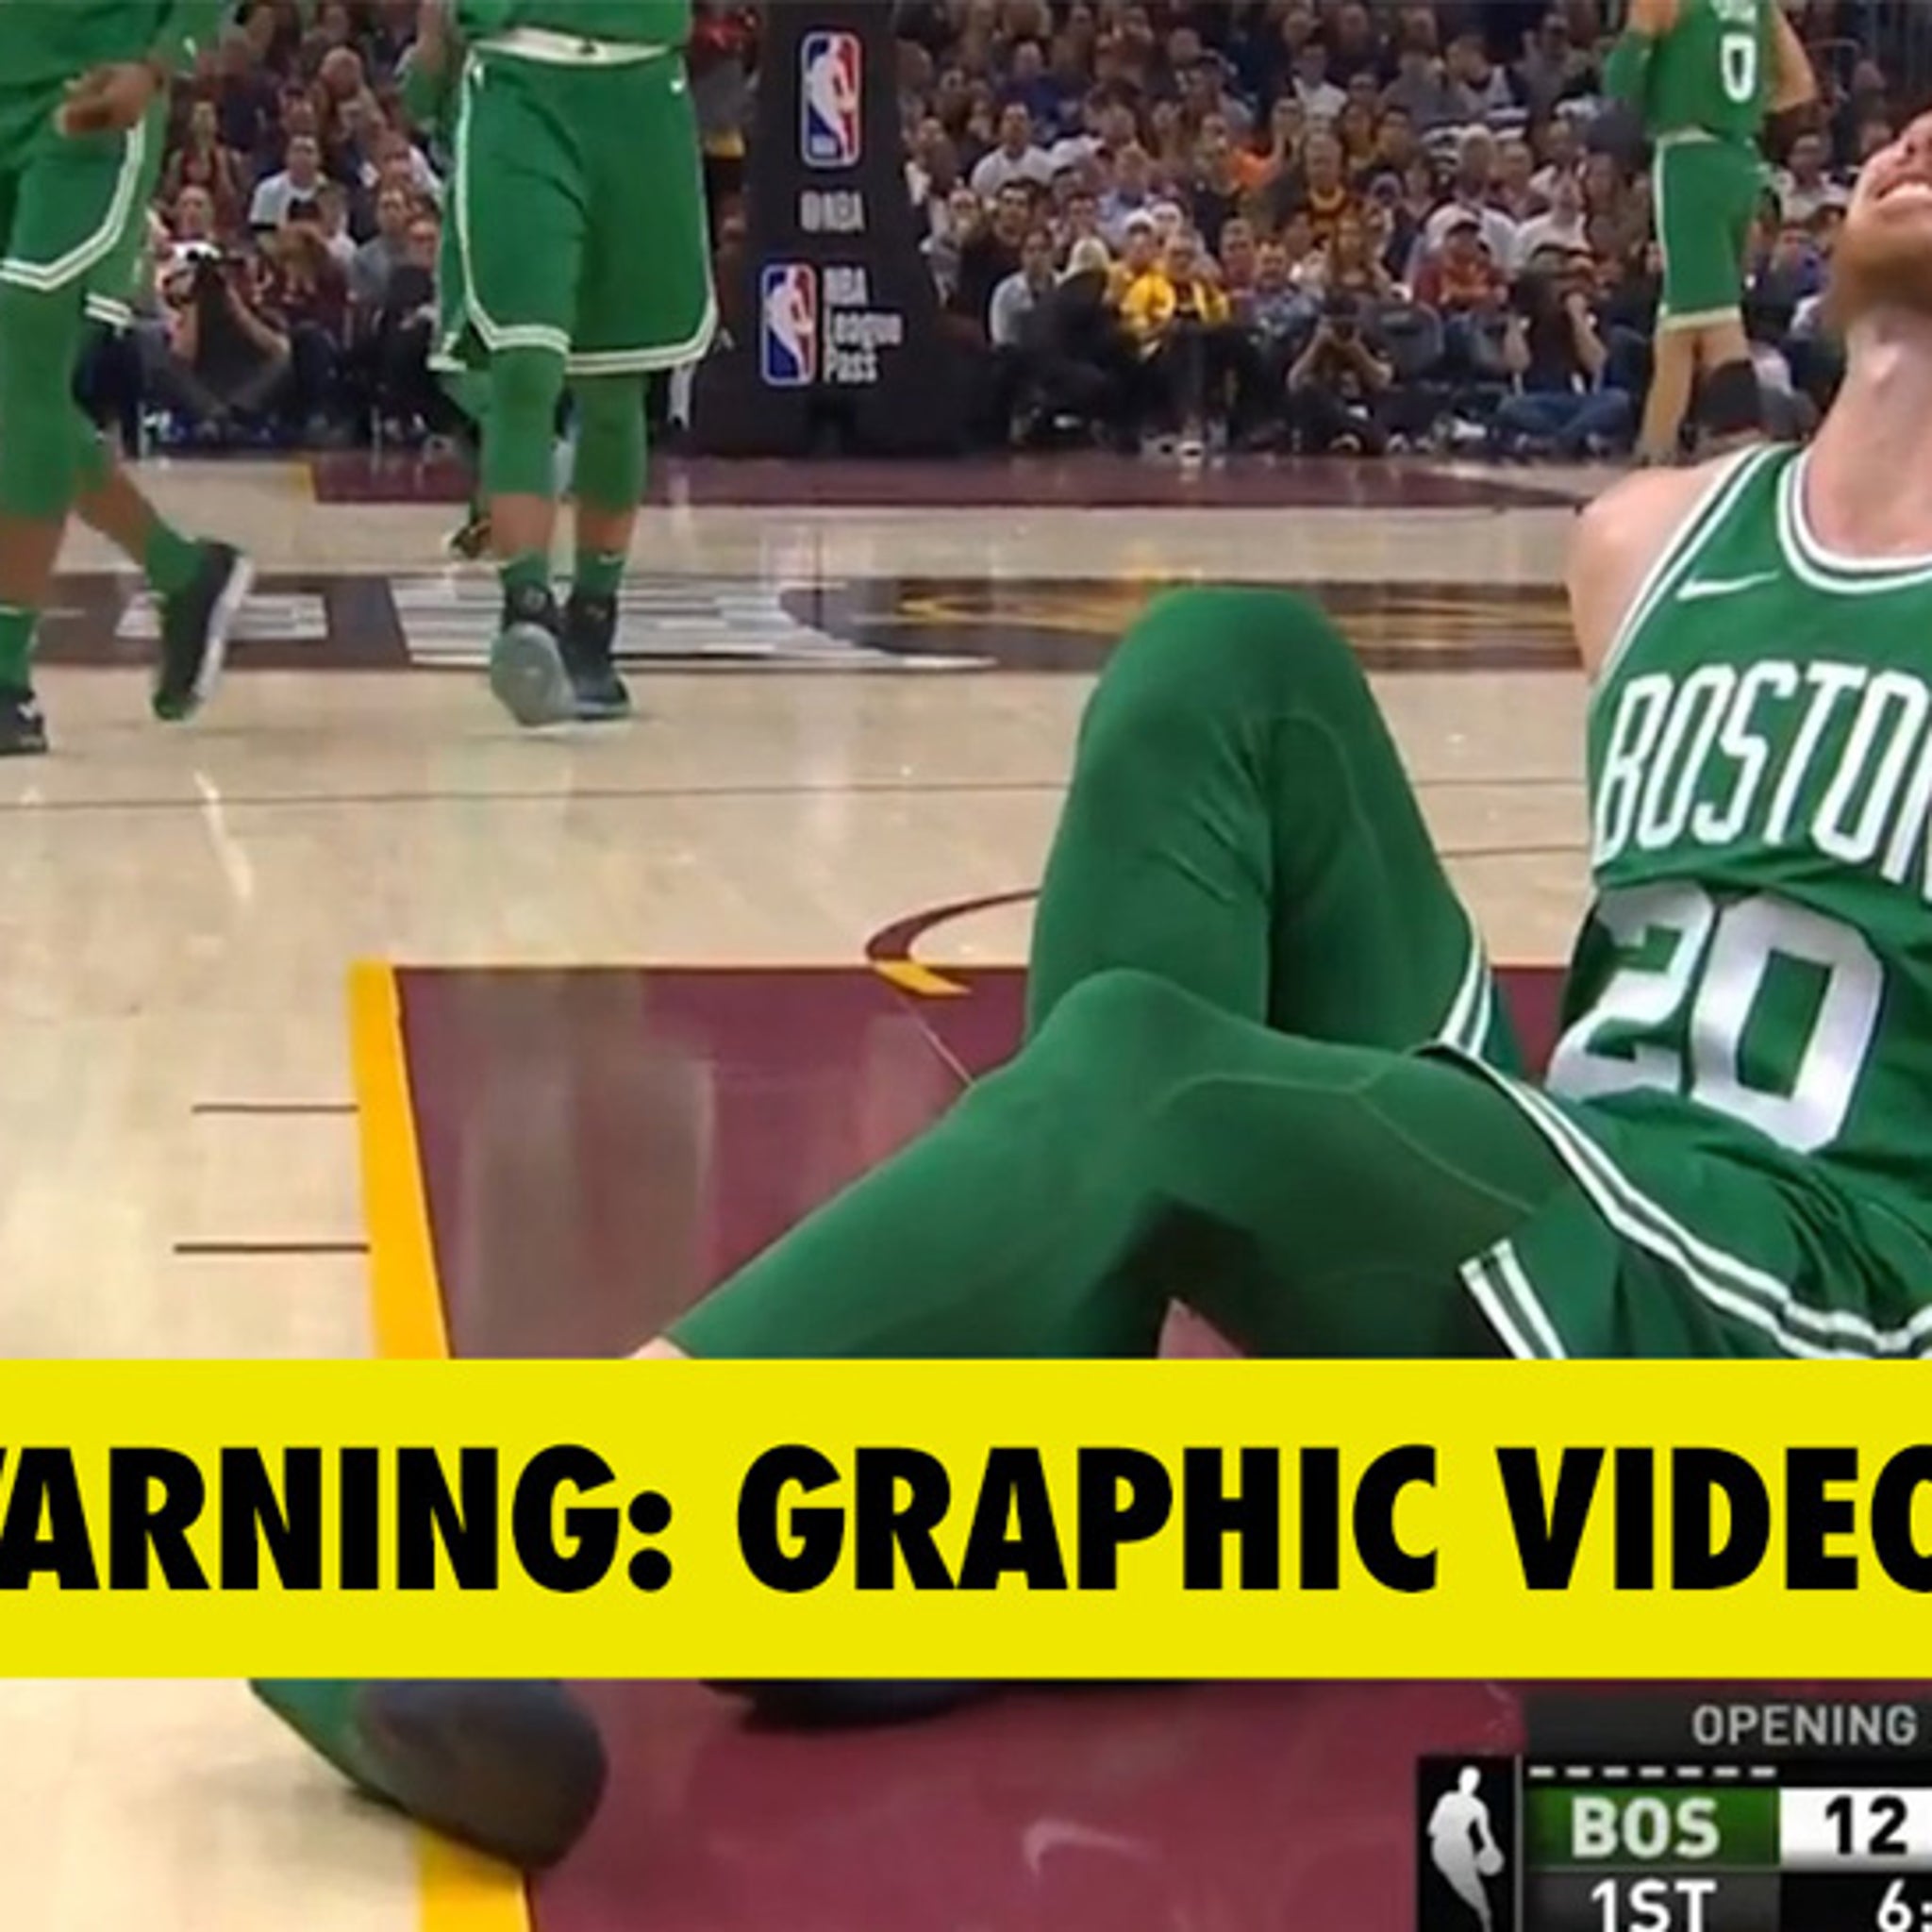 Gordon Hayward (ankle) expected to miss 4 weeks